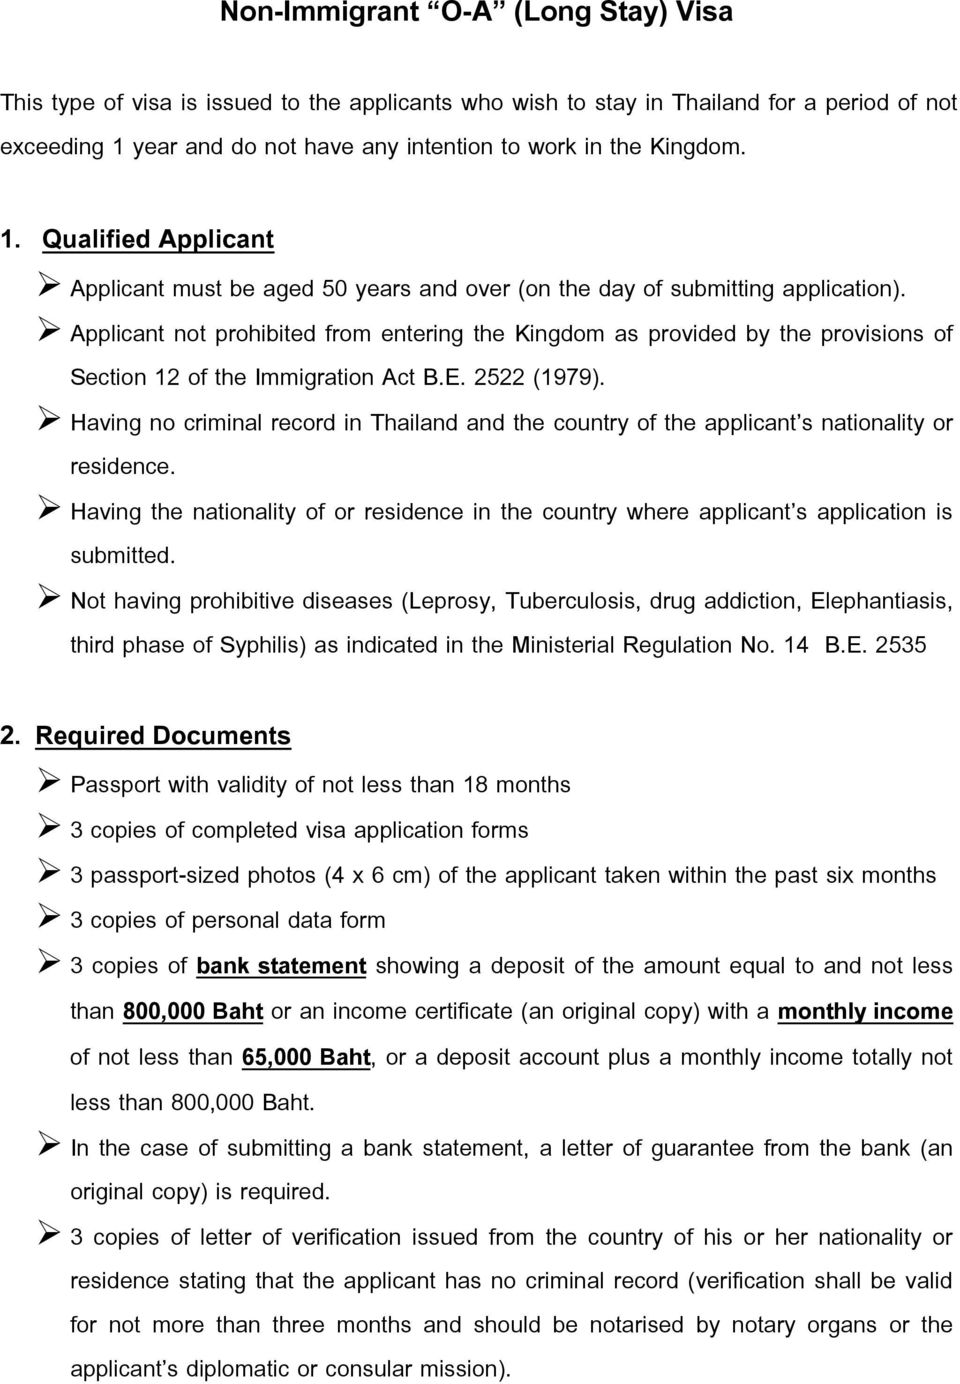 Applicant not prohibited from entering the Kingdom as provided by the provisions of Section 12 of the Immigration Act B.E. 2522 (1979).